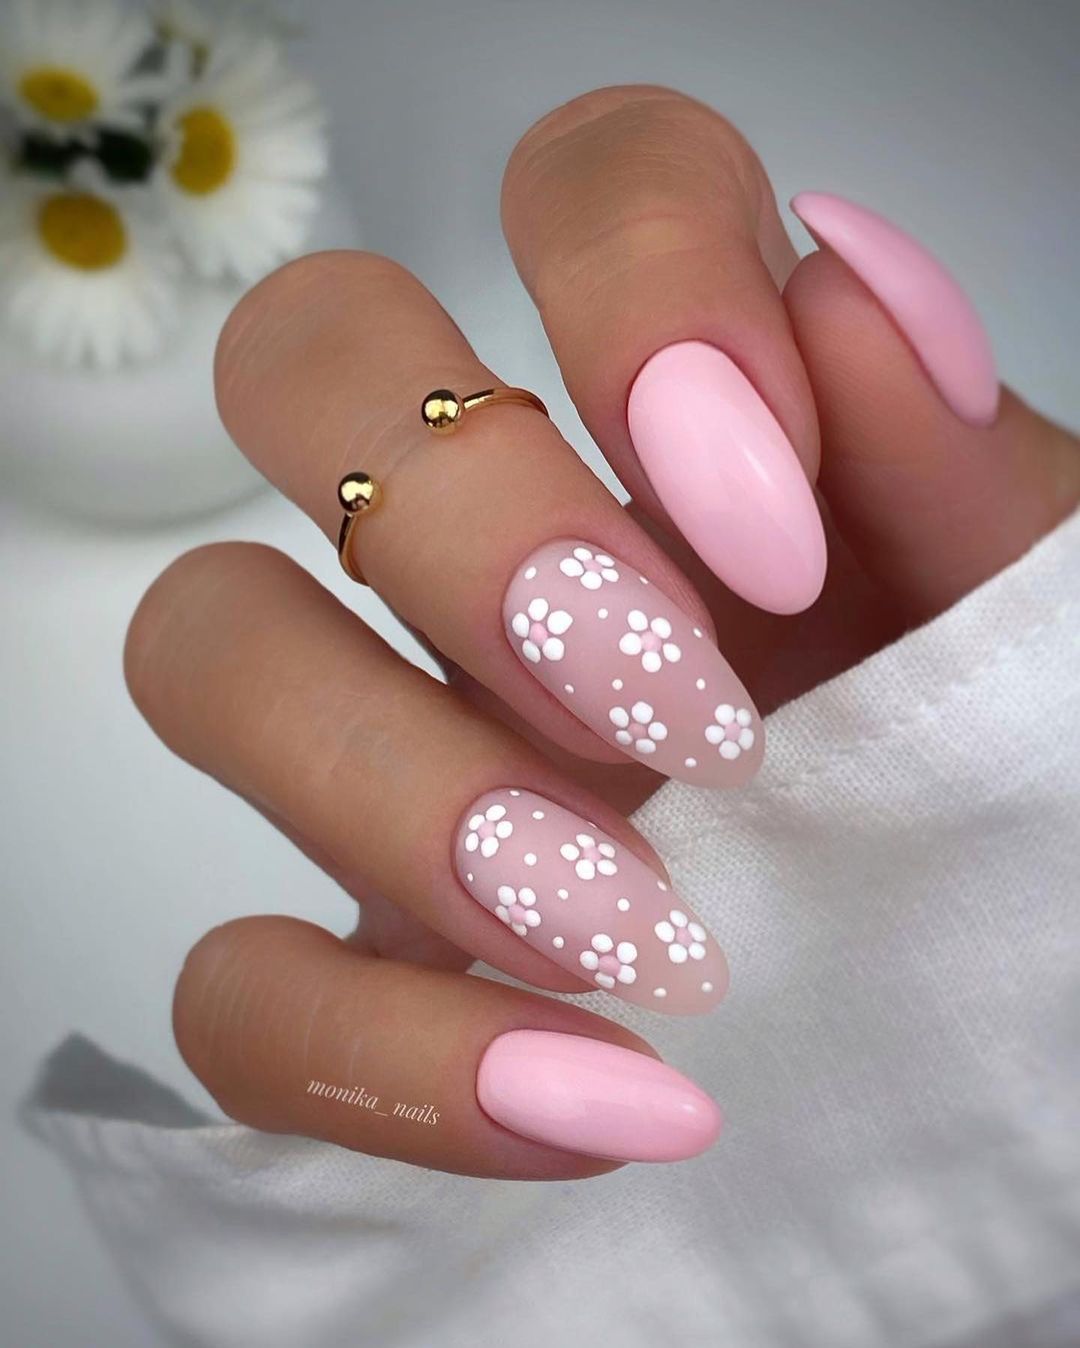 50+ Fall Nail Ideas You’re Going To Obsess Over images 38